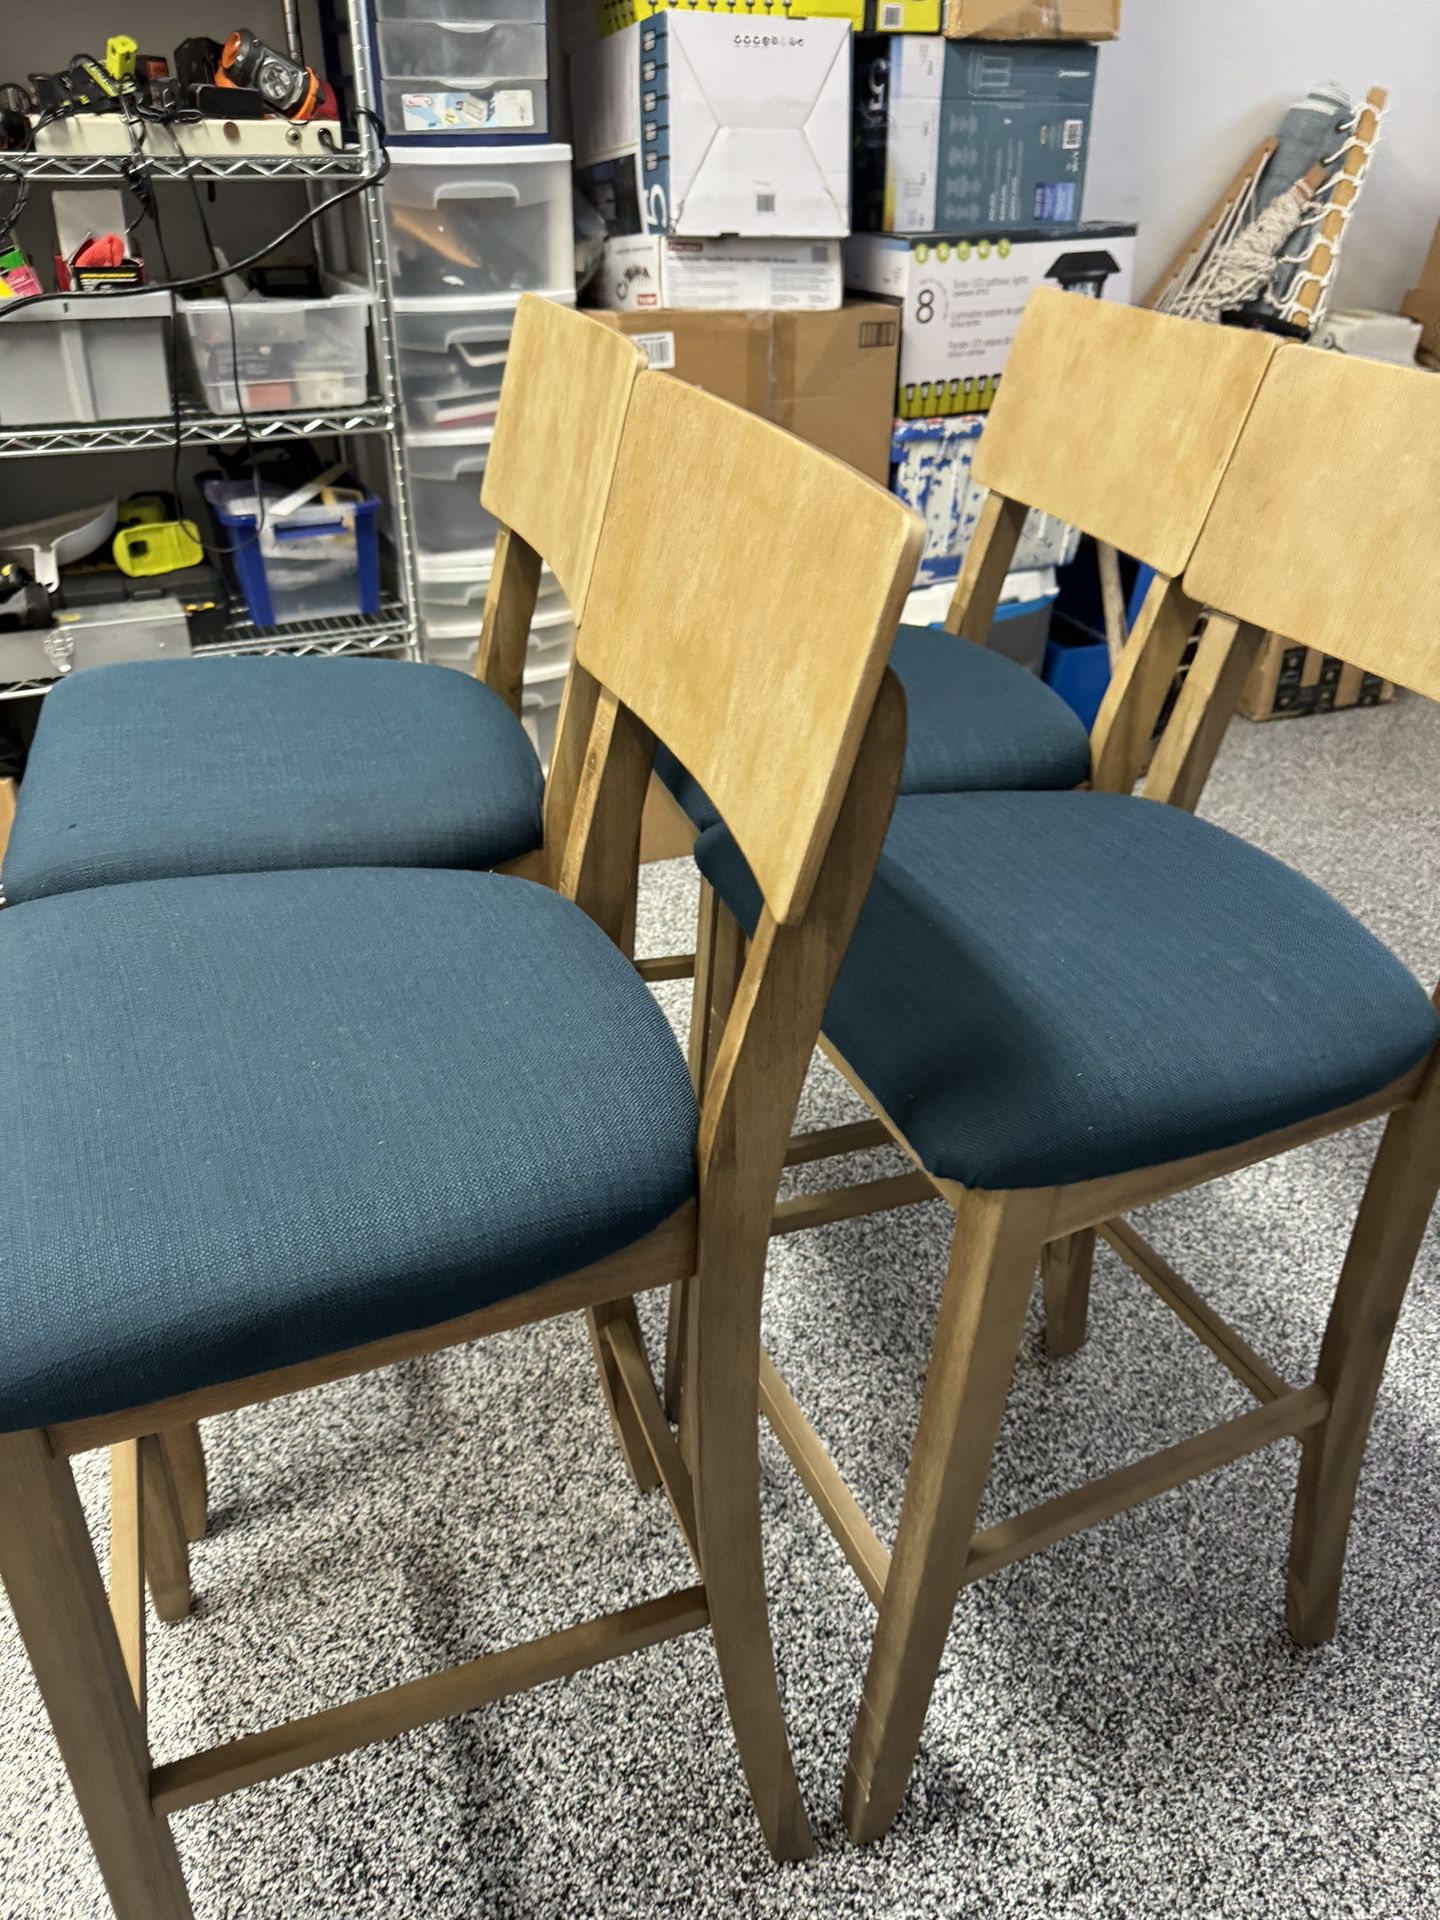 4 Bar Stools Chairs 30 Inches High To Cushion Kitchen  Cushioned